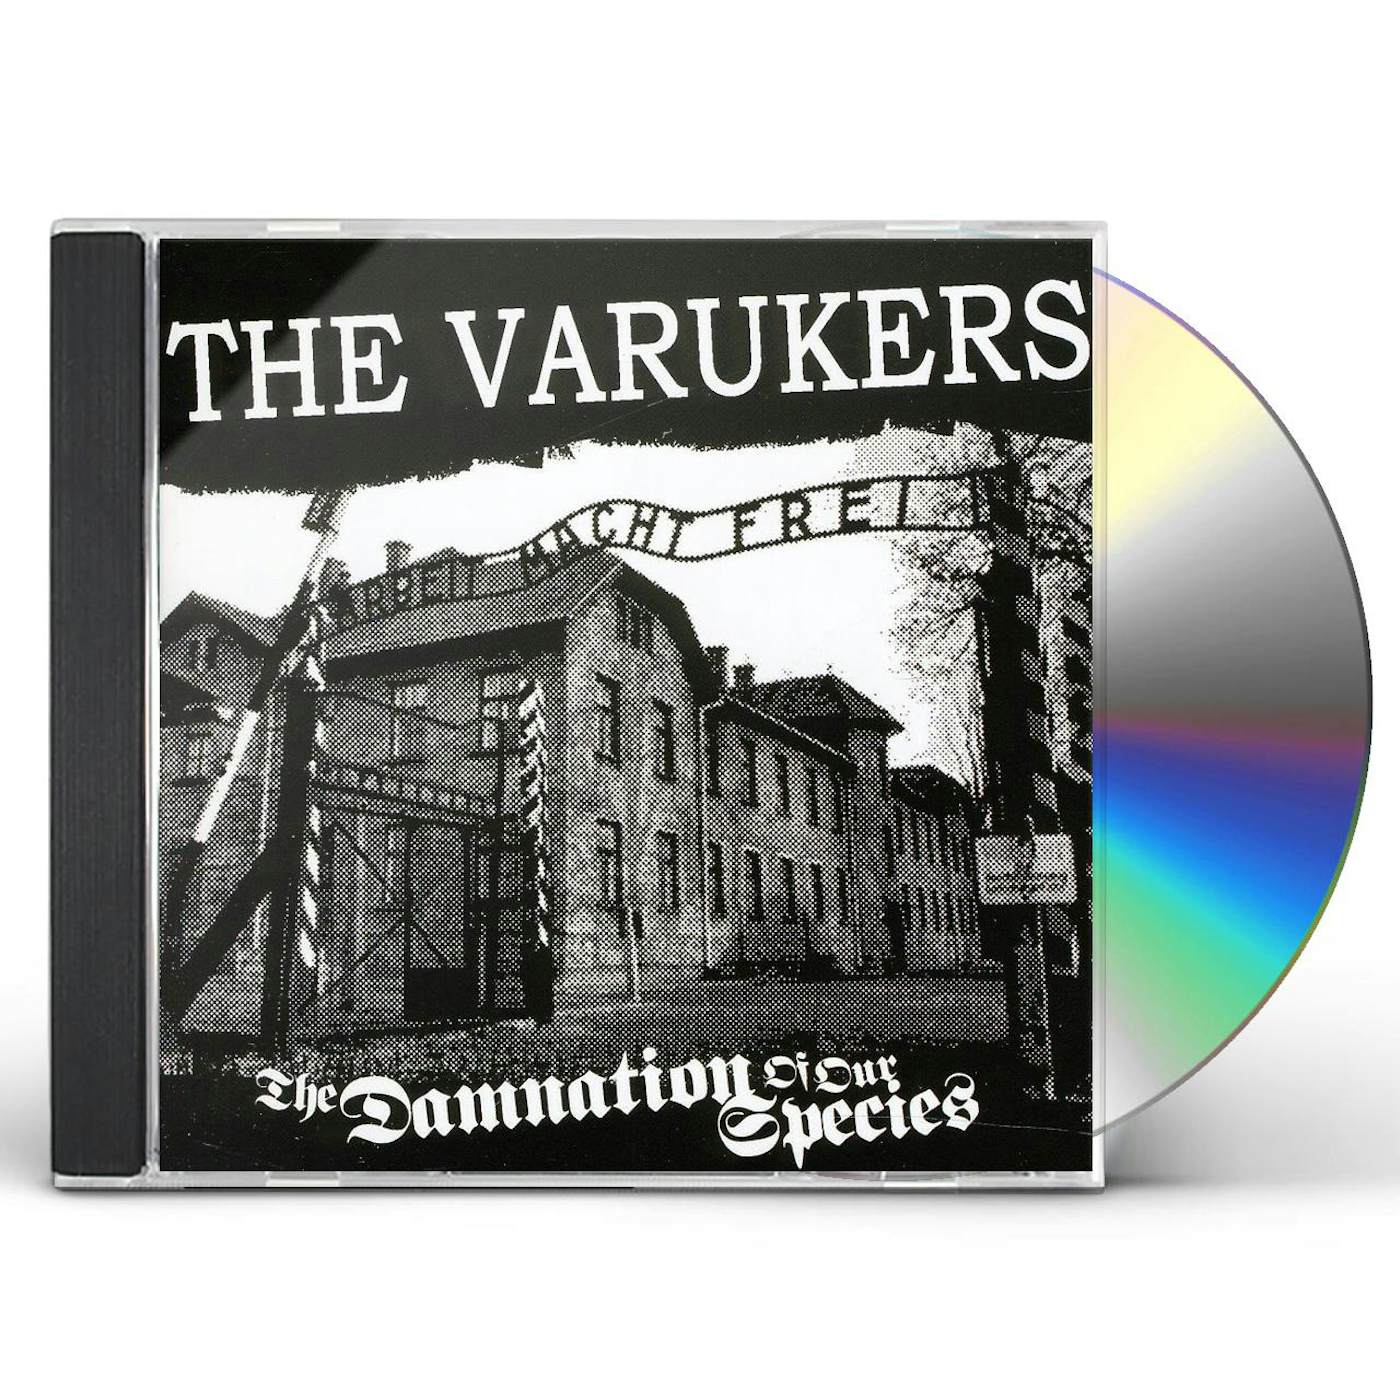 The Varukers DAMNATION OF OUR SPECIES CD